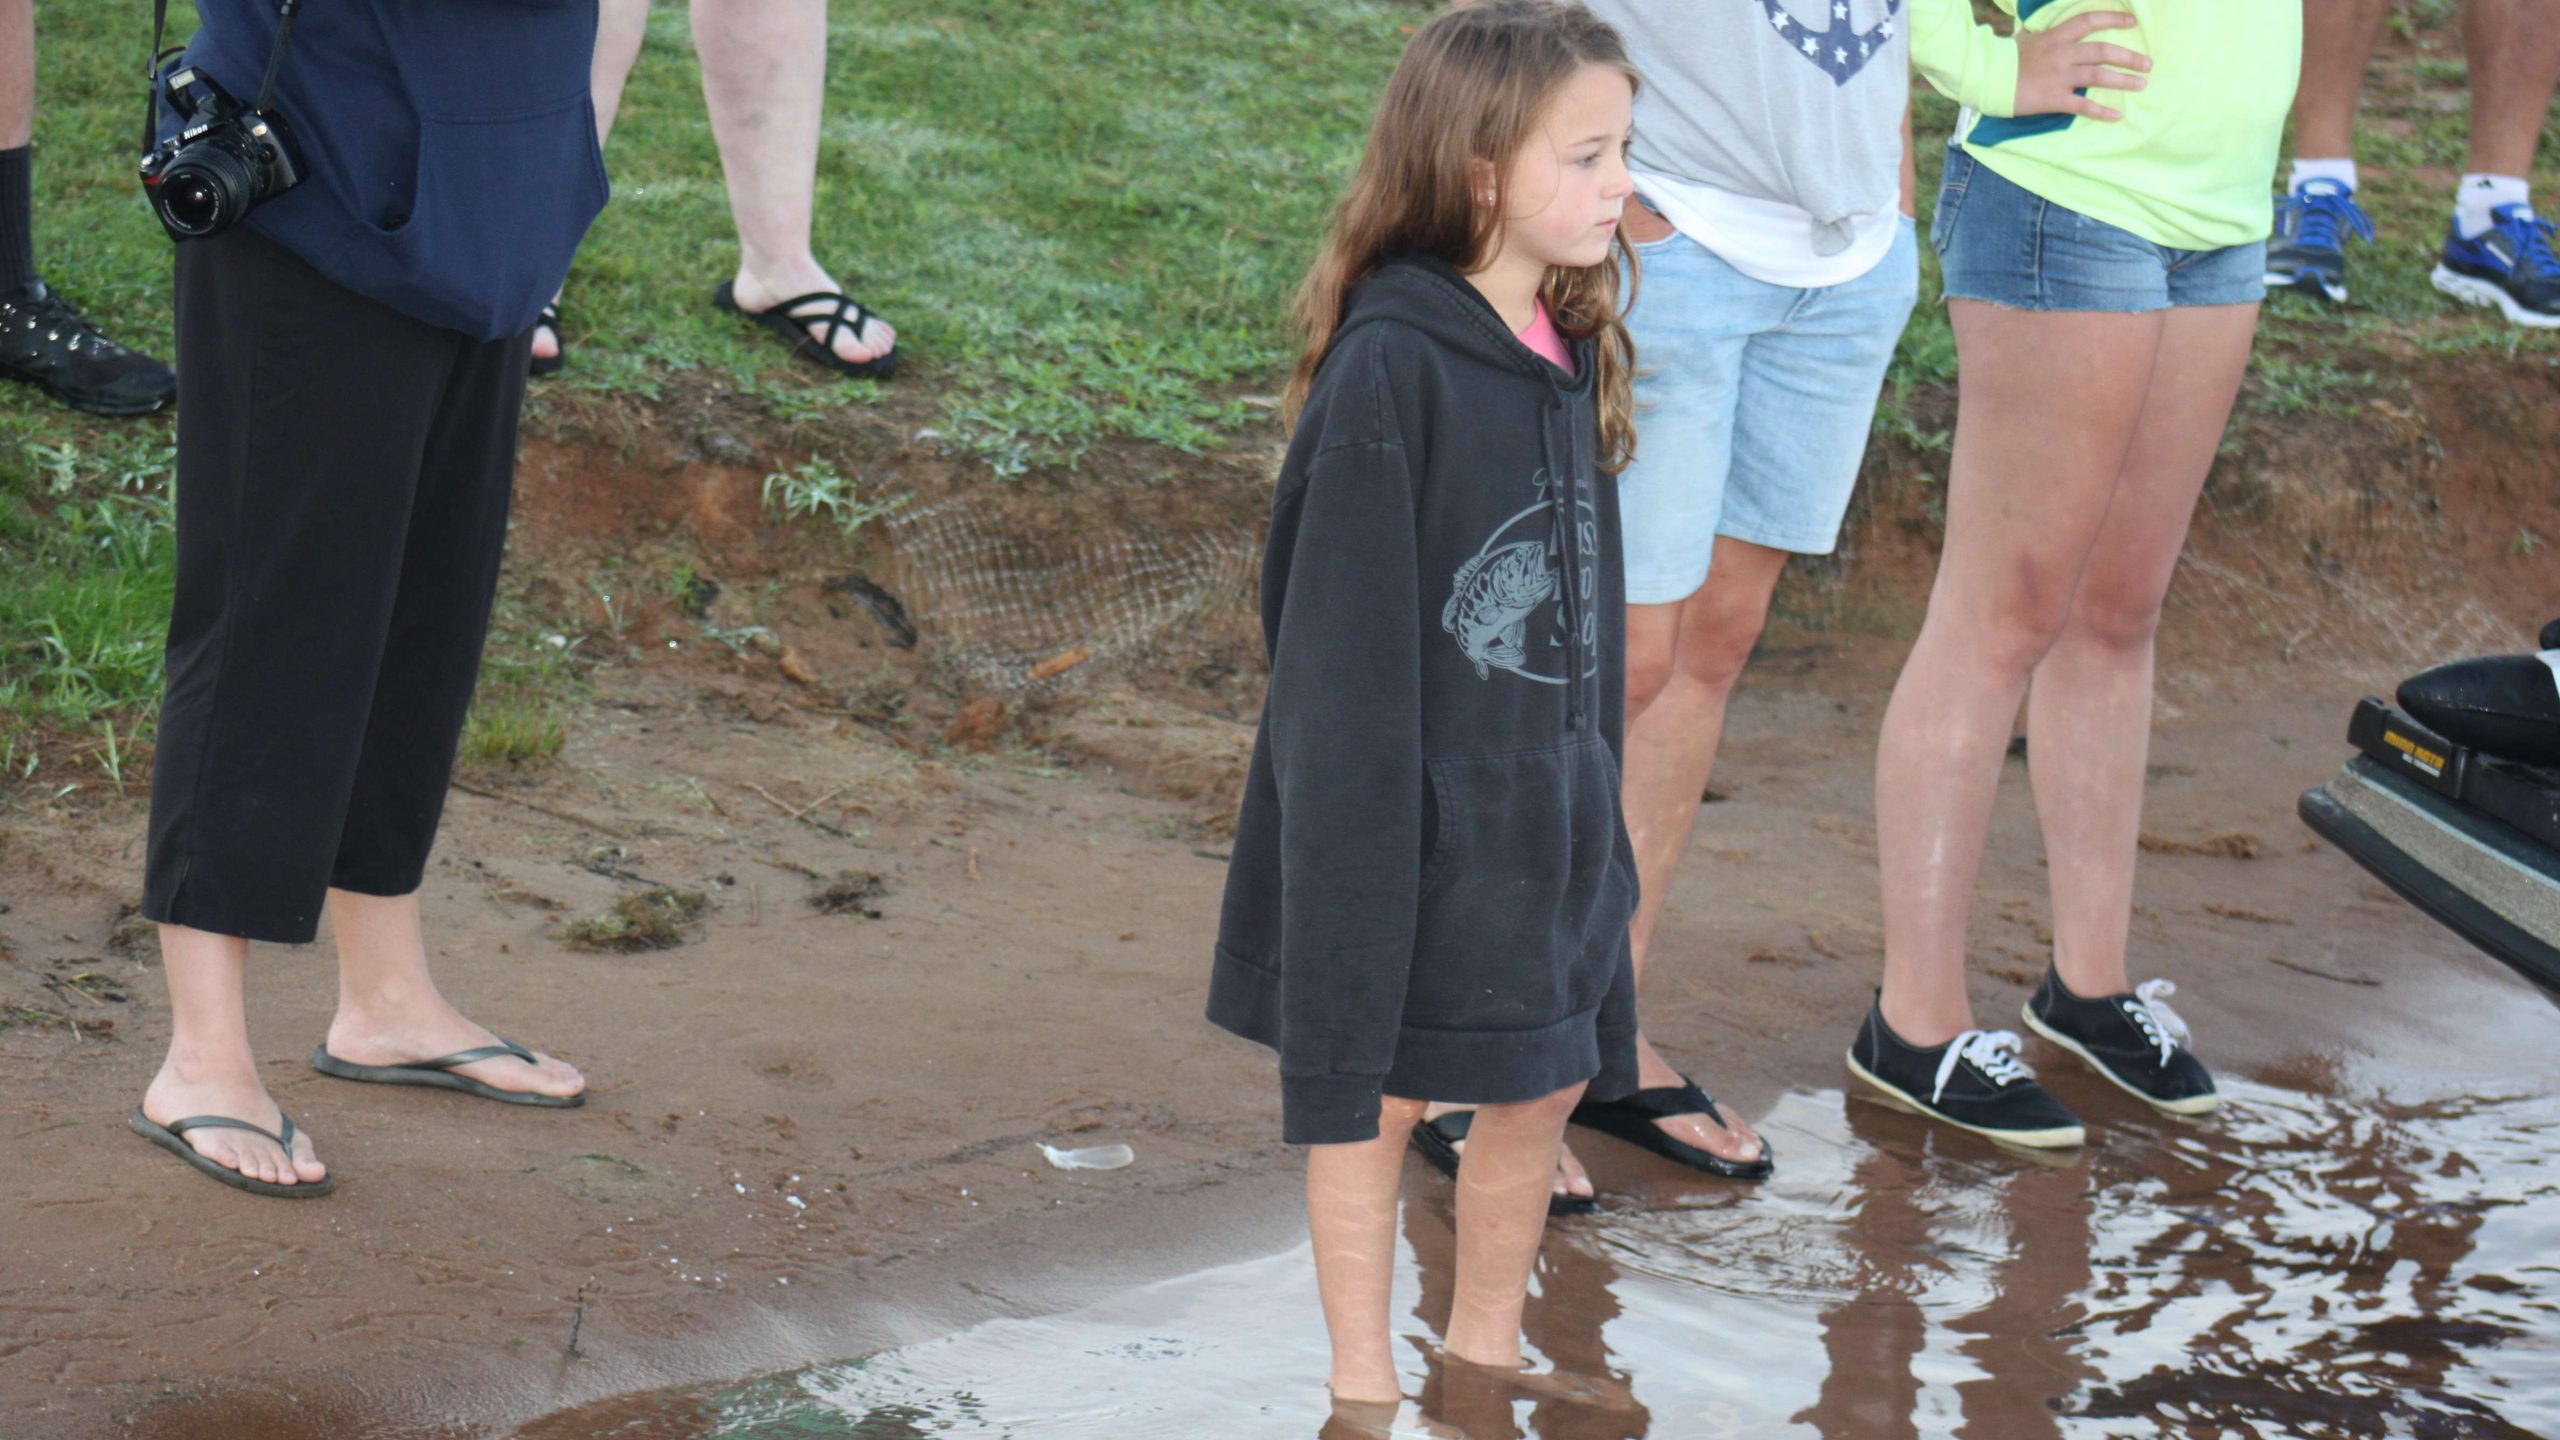 This young fan decided to take off her shoes and stick her feet in the lake.  